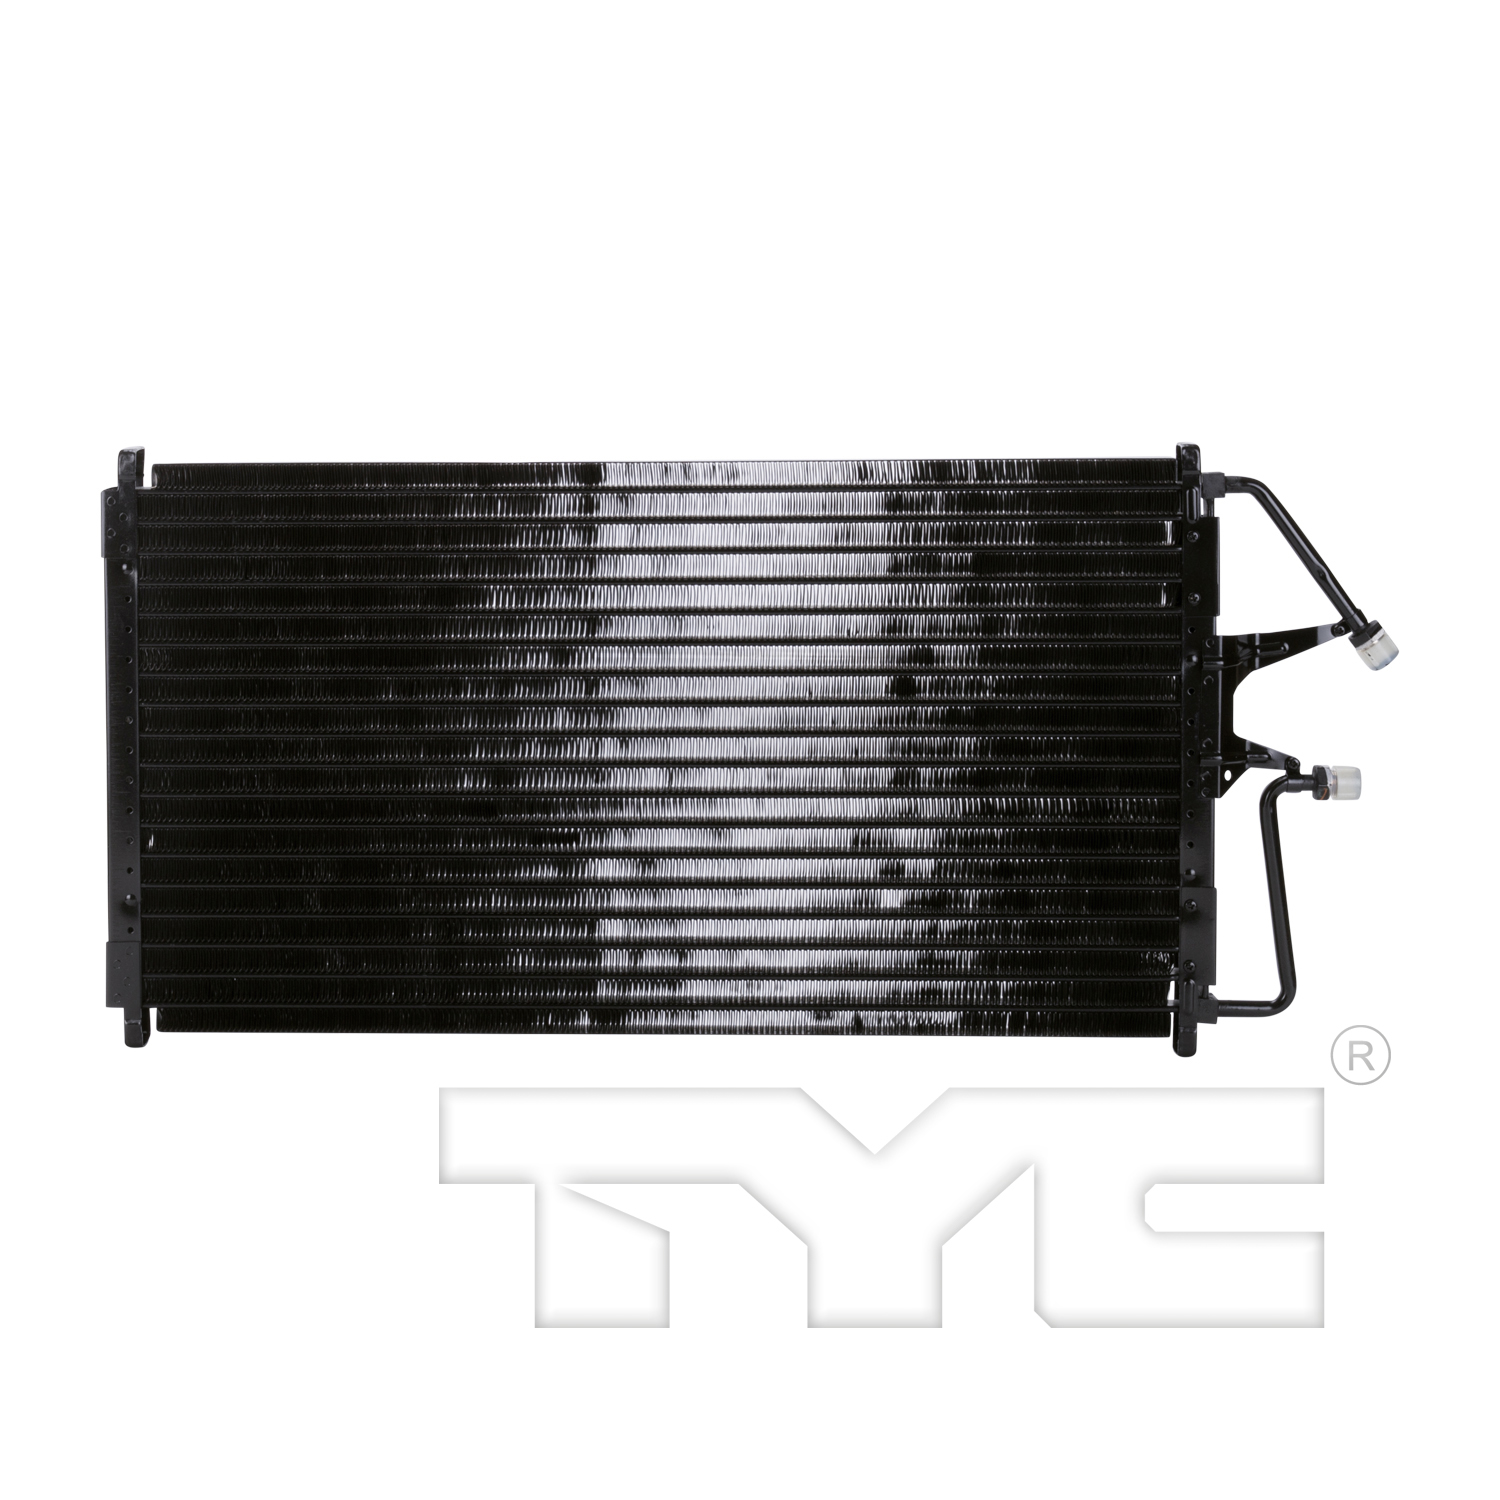 Aftermarket AC CONDENSERS for CHEVROLET - K2500 SUBURBAN, K2500 SUBURBAN,96-99,Air conditioning condenser